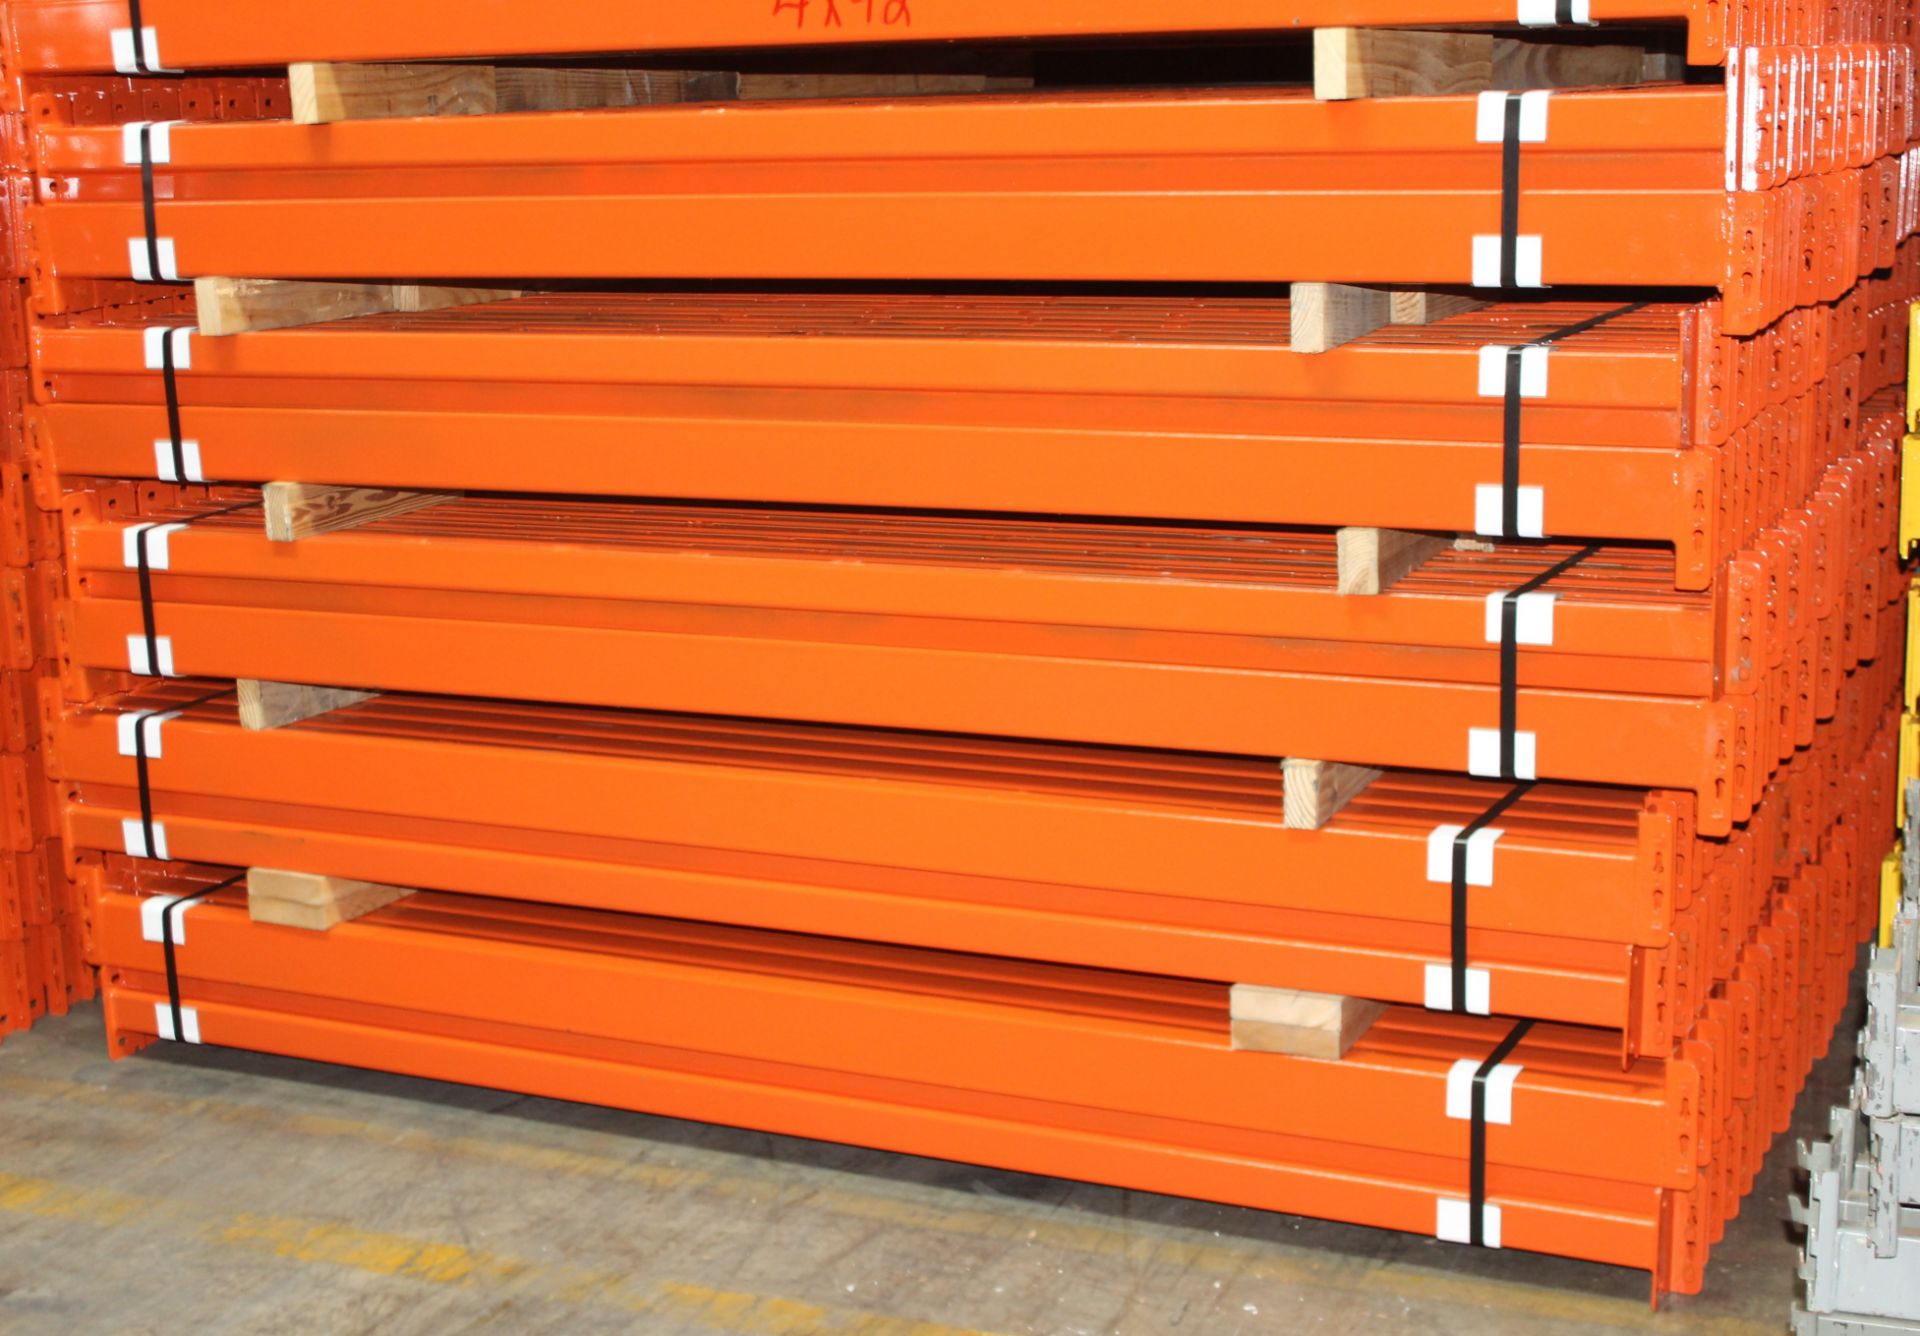 56 BAYS OF TEARDROP STYLE PALLET RACK, LIKE NEW, SIZE: 8'H x 24"D X 96"W - Image 3 of 4